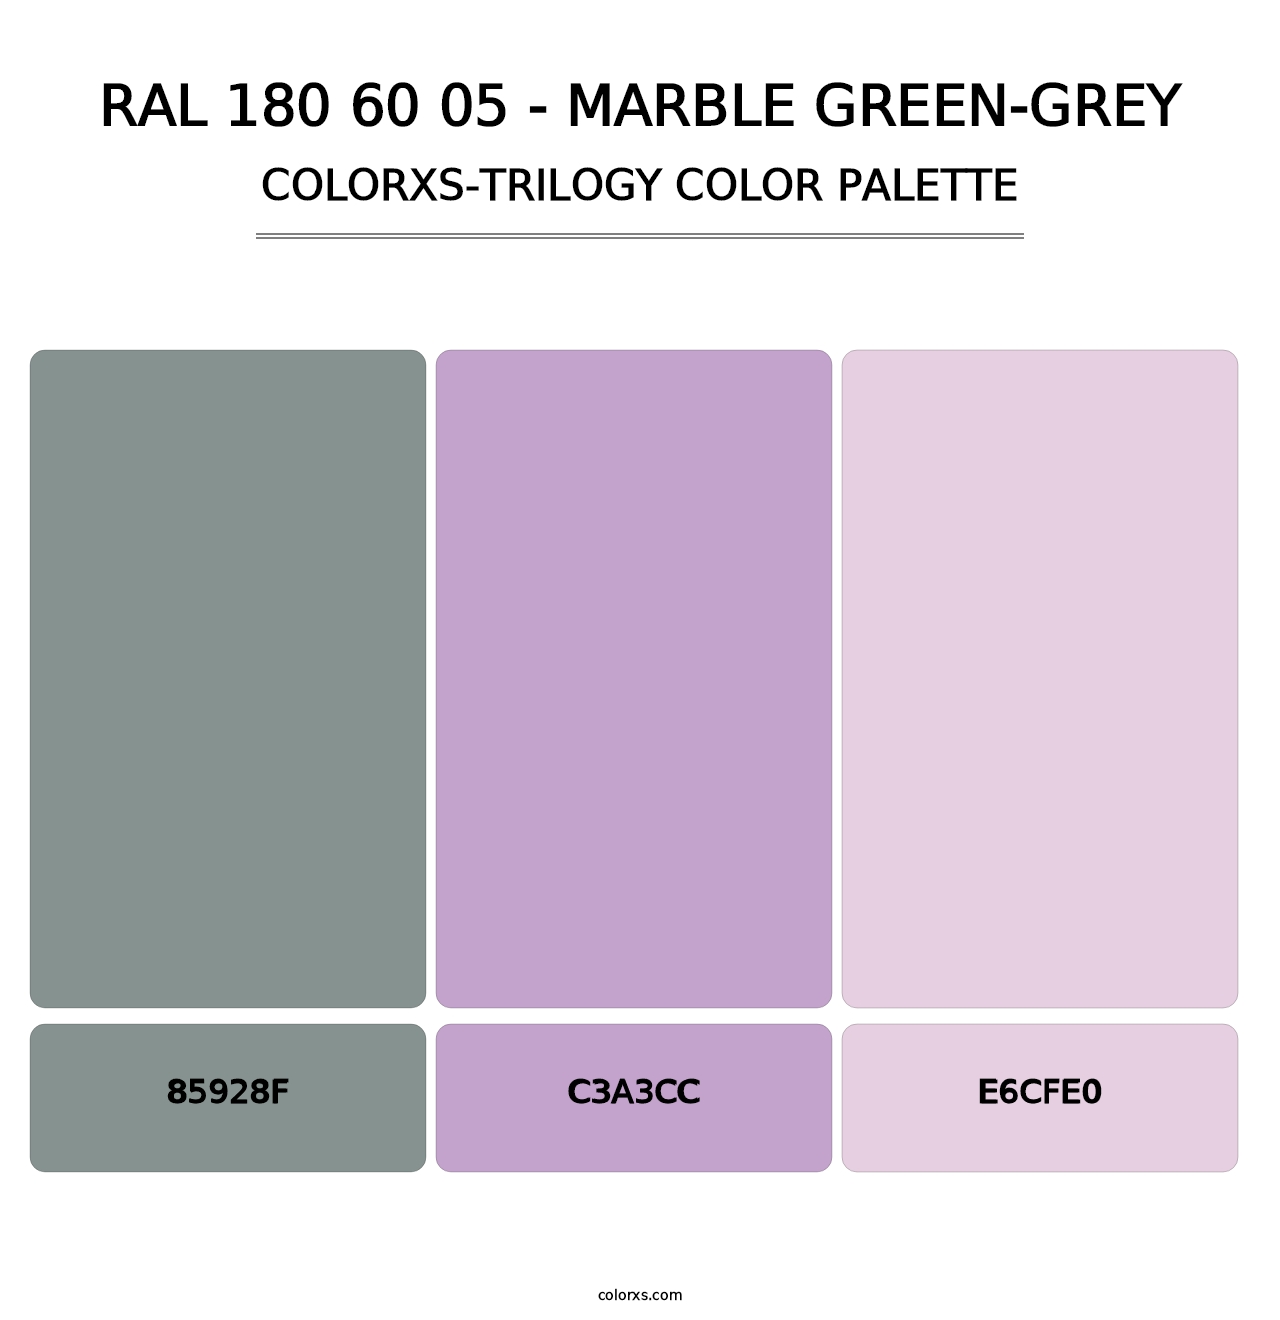 RAL 180 60 05 - Marble Green-Grey - Colorxs Trilogy Palette